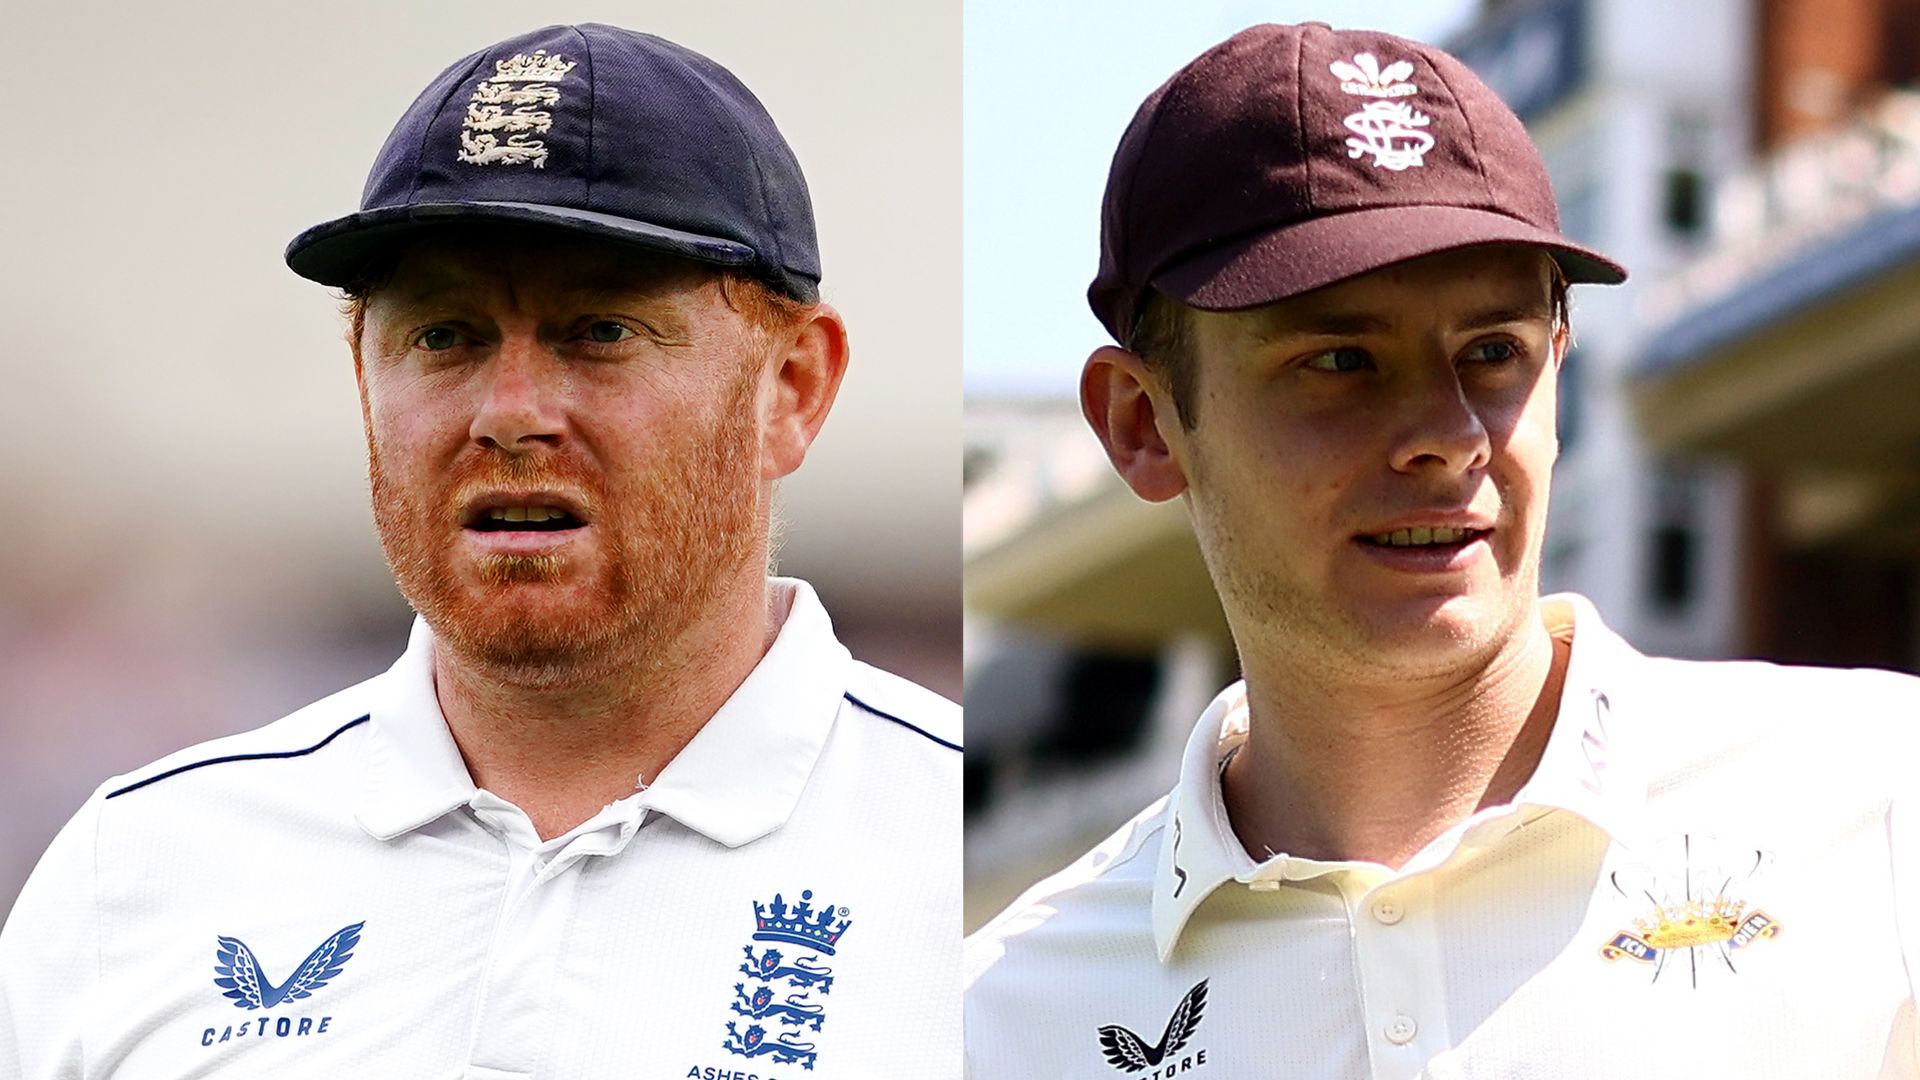 Bairstow to be dropped by England with Smith set for Test debut